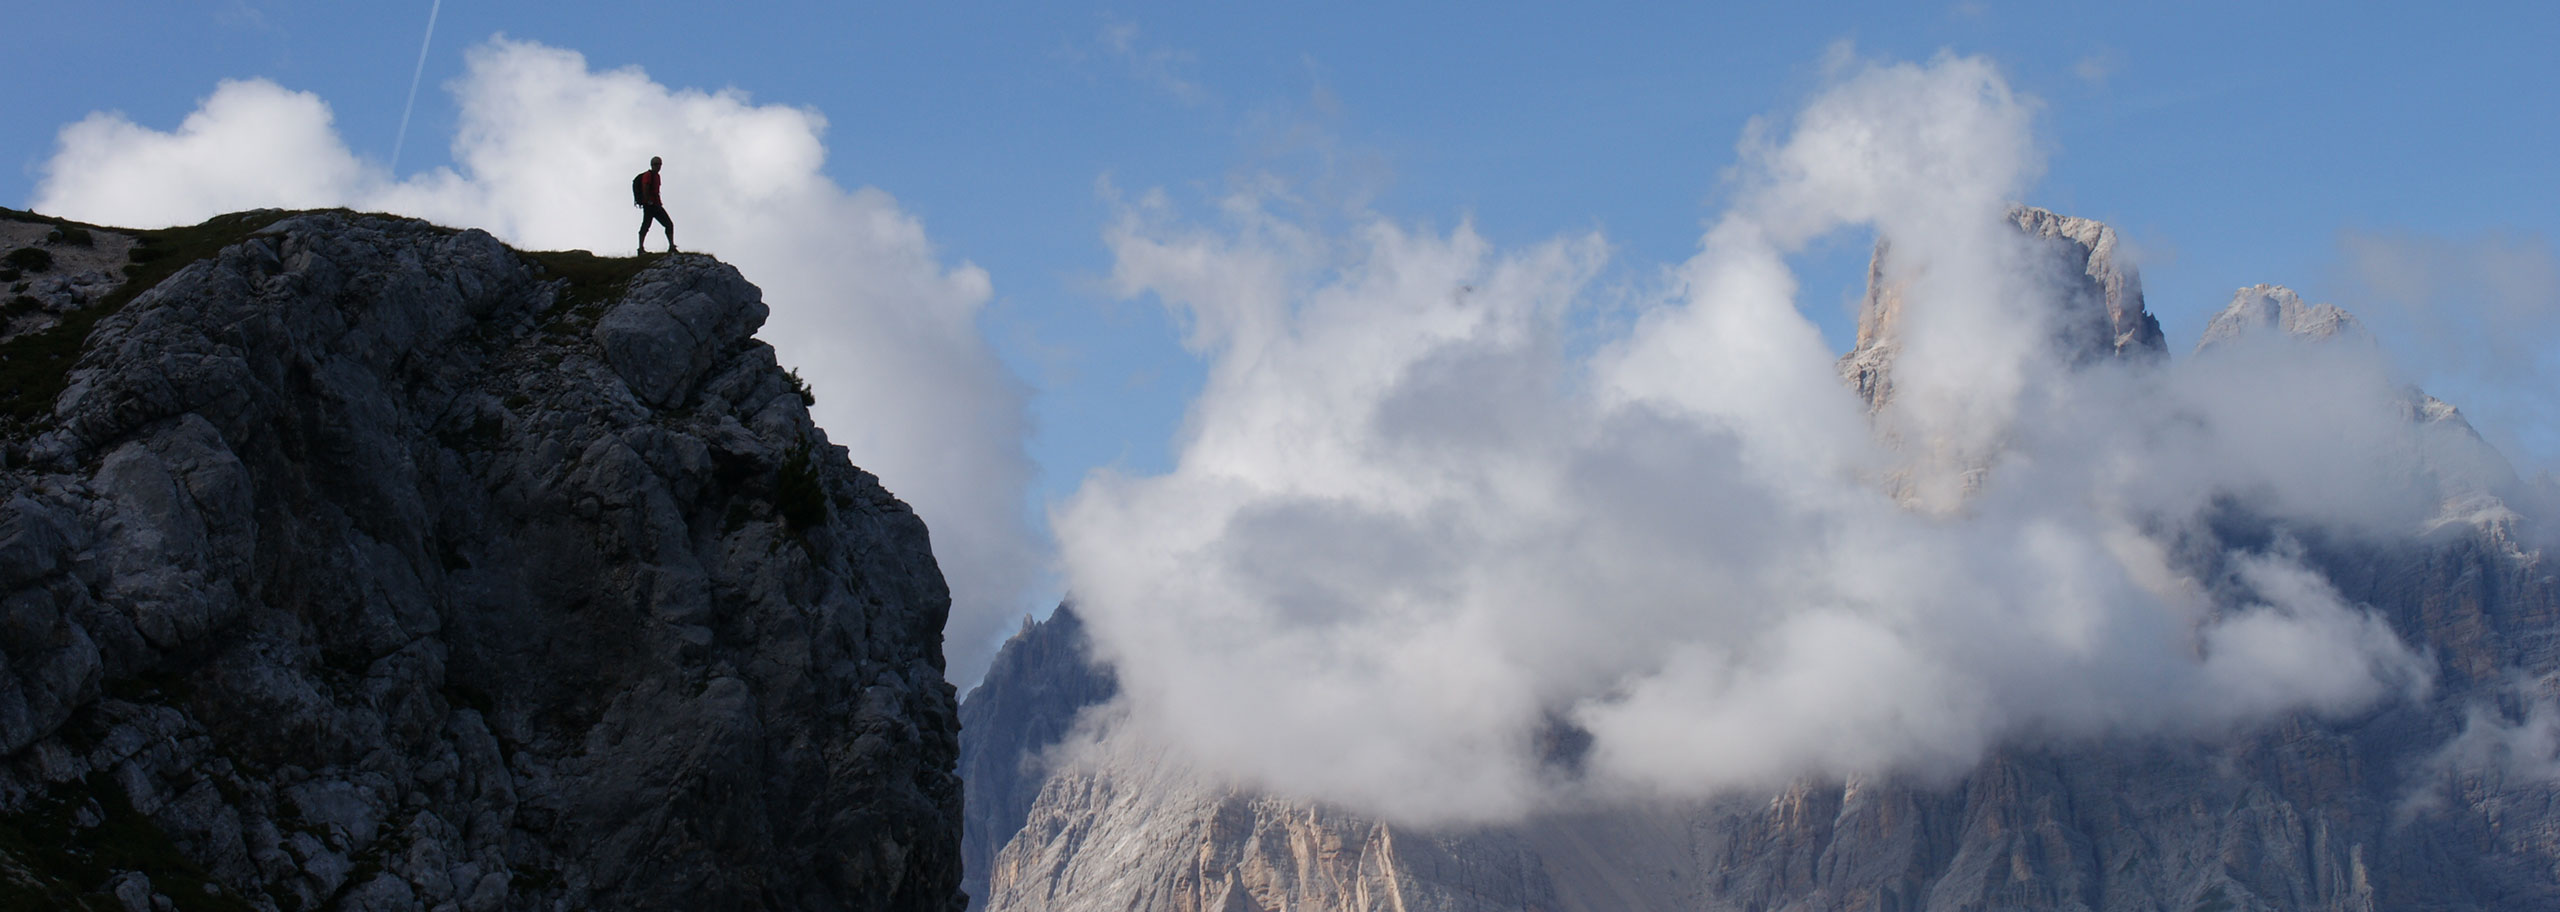 Trekking with a Mountain Guide in Val di Fassa